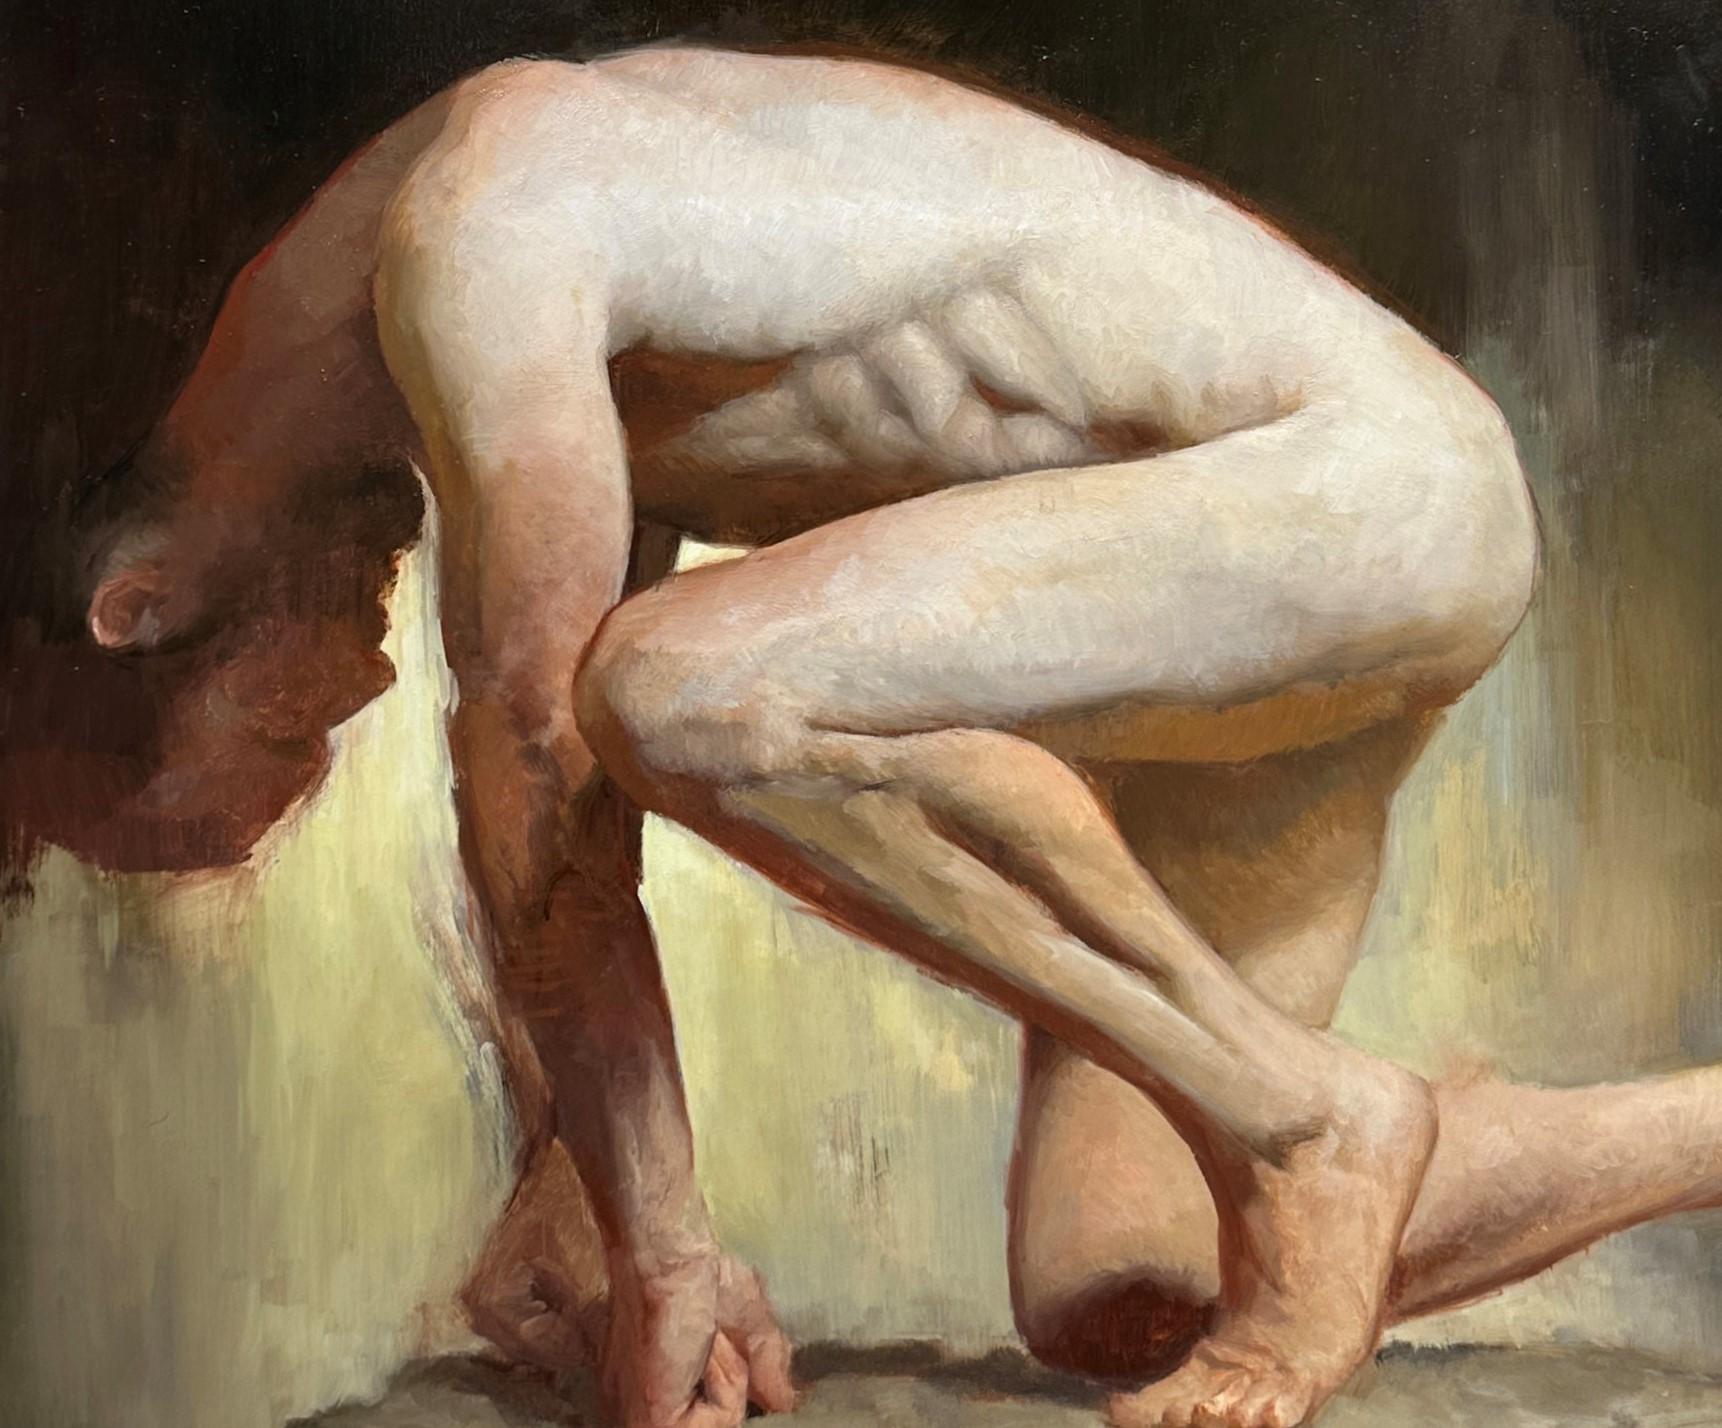 Pressure System, Male Nude Crouching on a Stone Pedestal, Original Oil on Panel - Contemporary Painting by Zack Zdrale